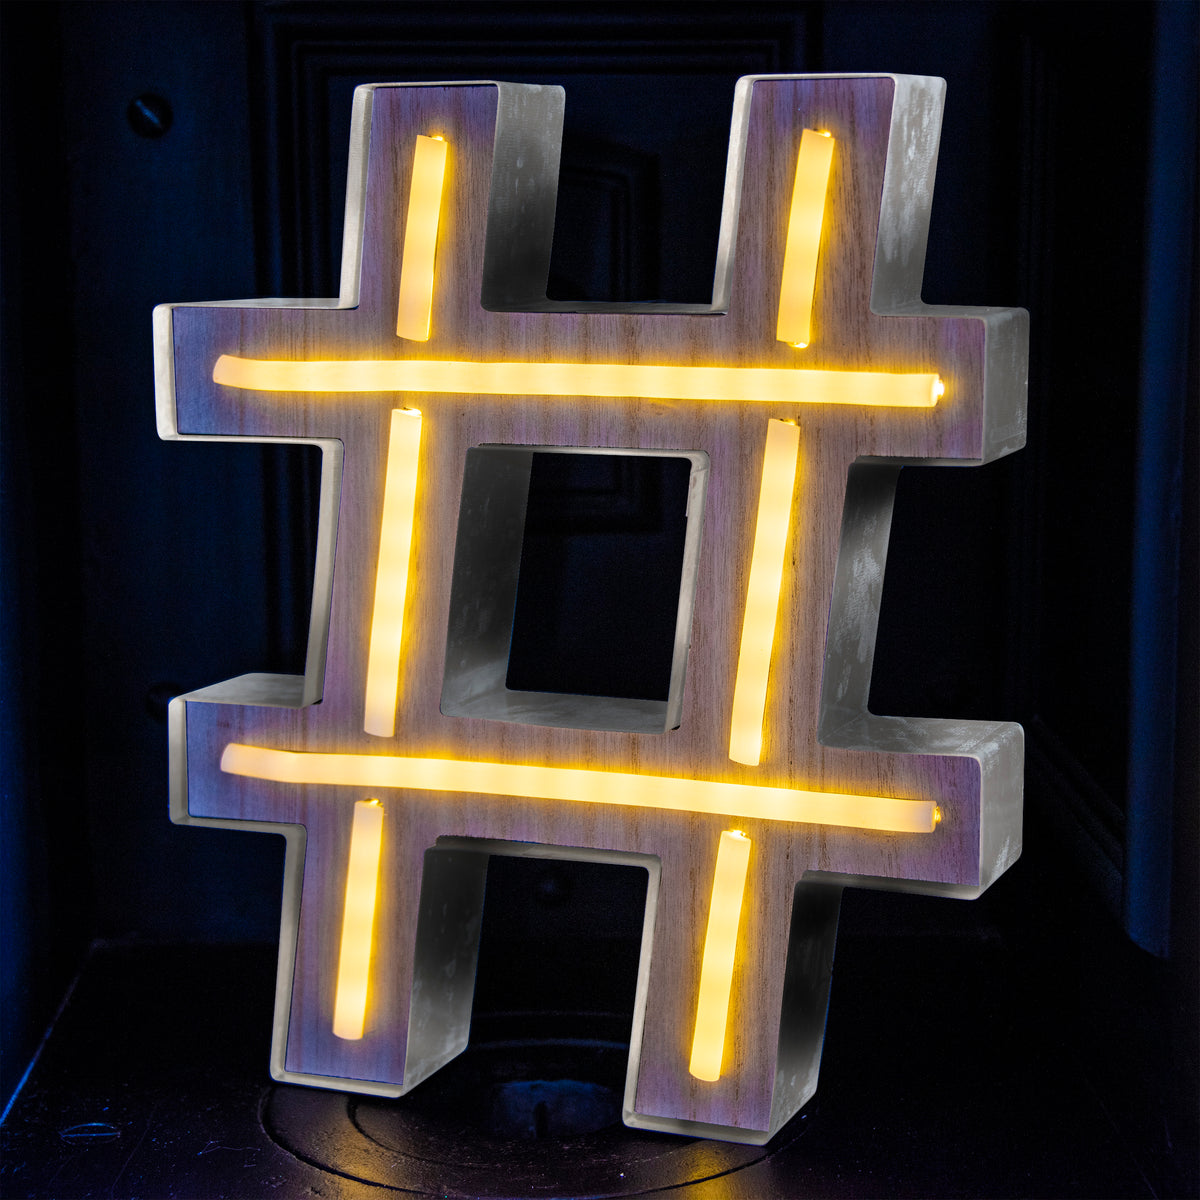 Retro Lit Hashtag Sign Battery Powered